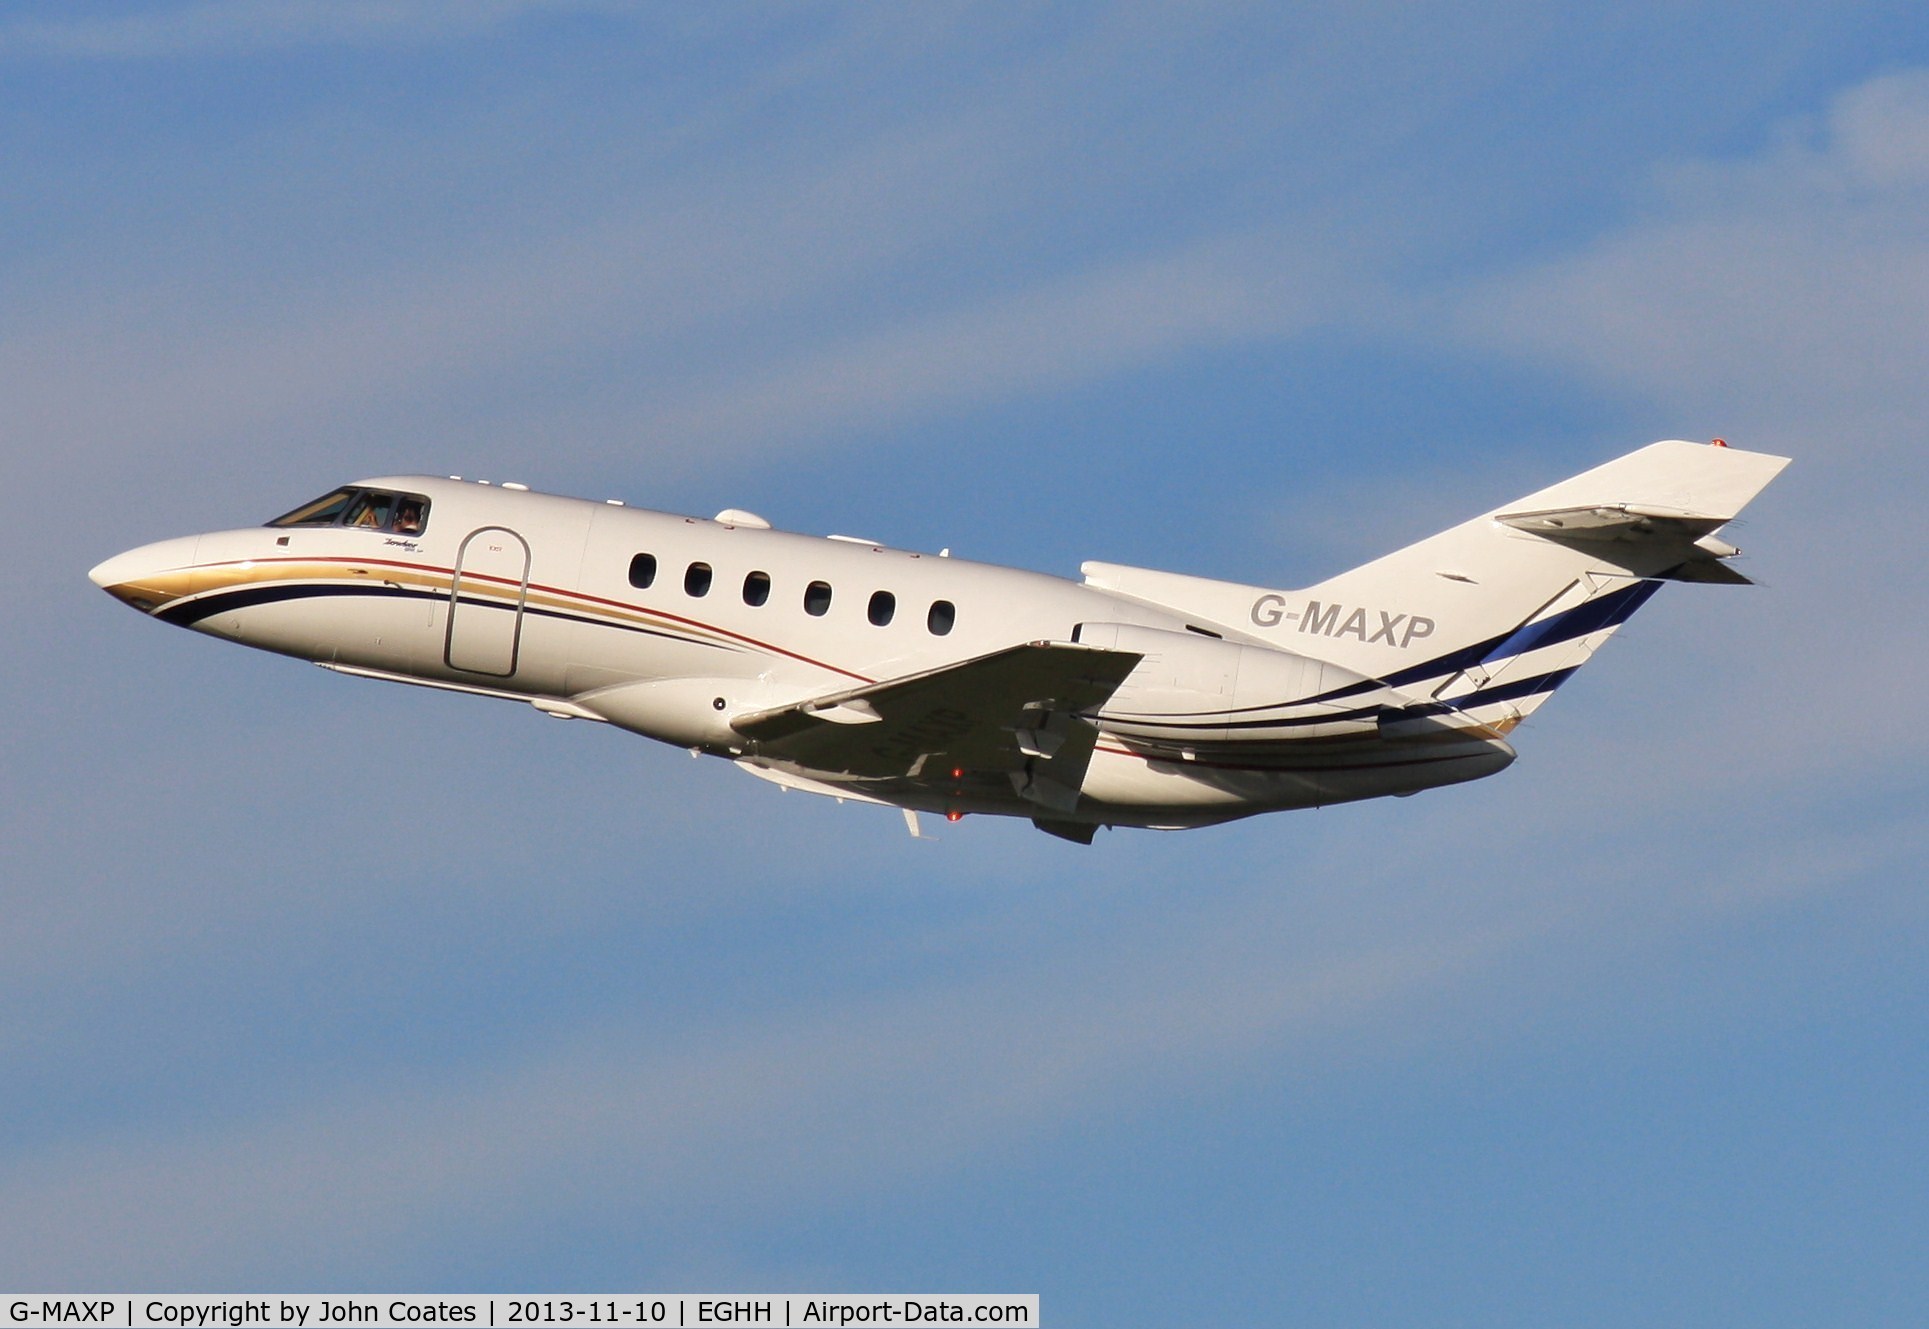 G-MAXP, 2000 Raytheon Hawker 800XP C/N 258477, Departing from JETS